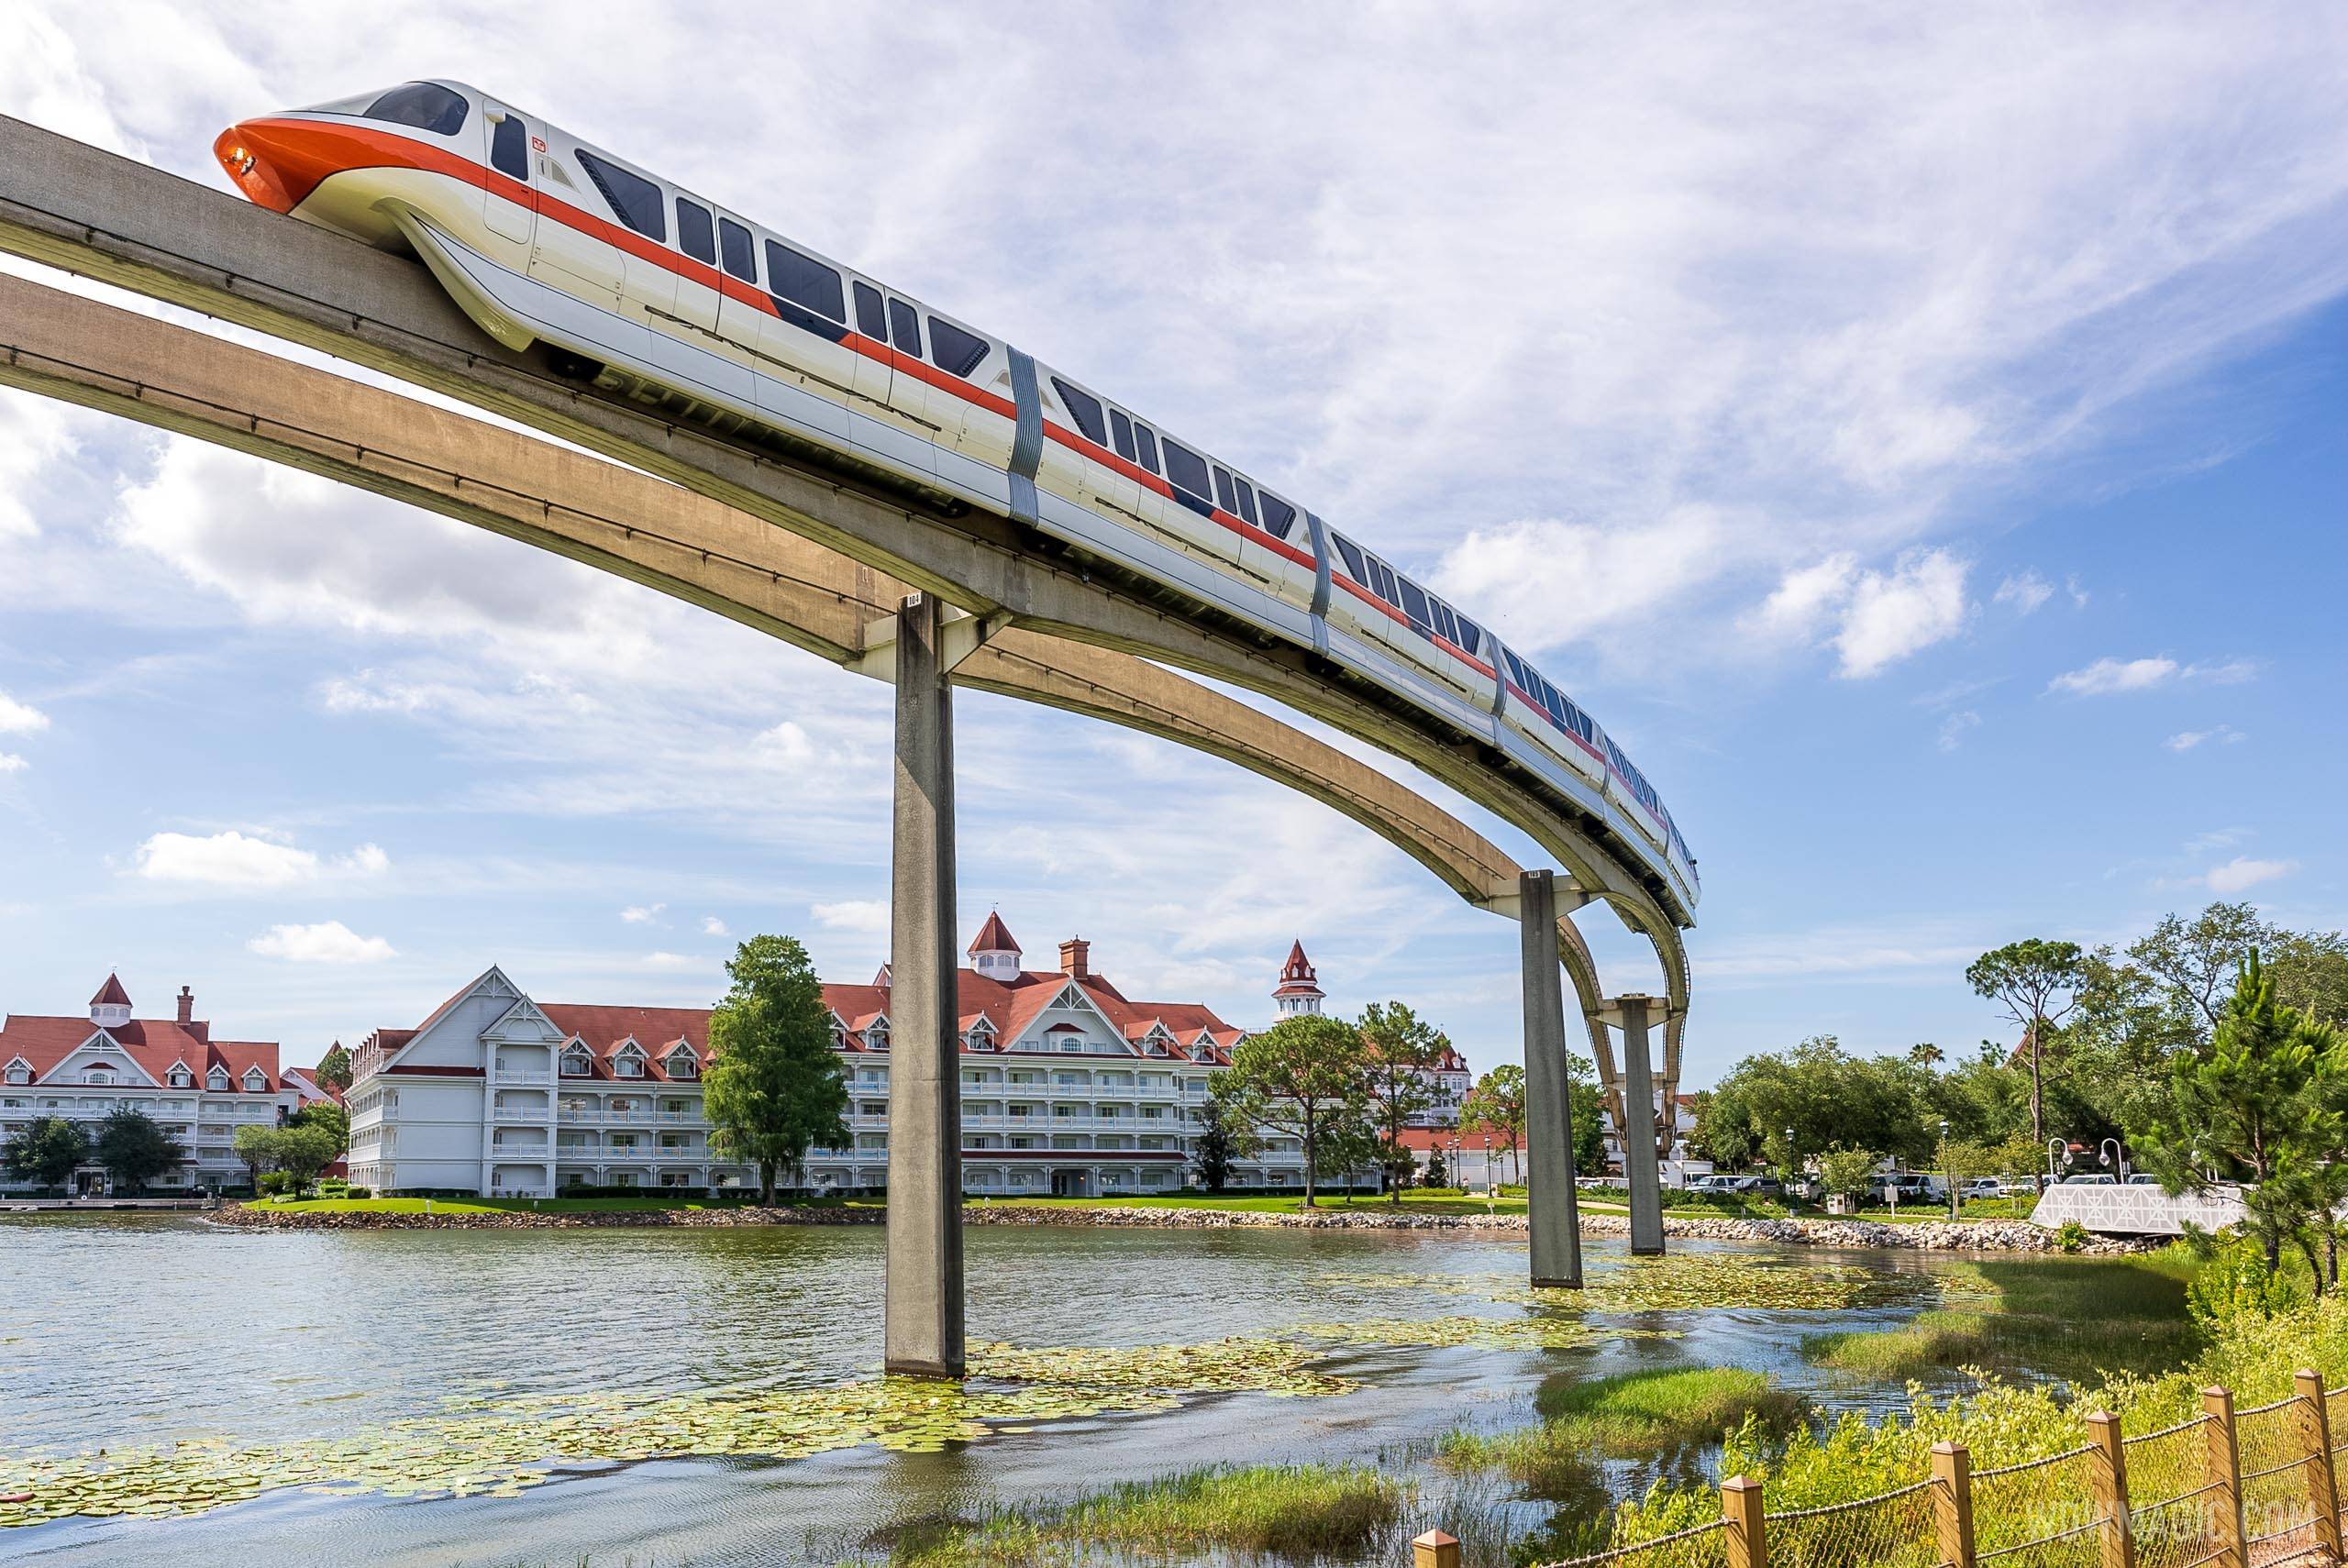 Monorail Orange on the Express Beam passes by Disney's Grand Floridian Resort